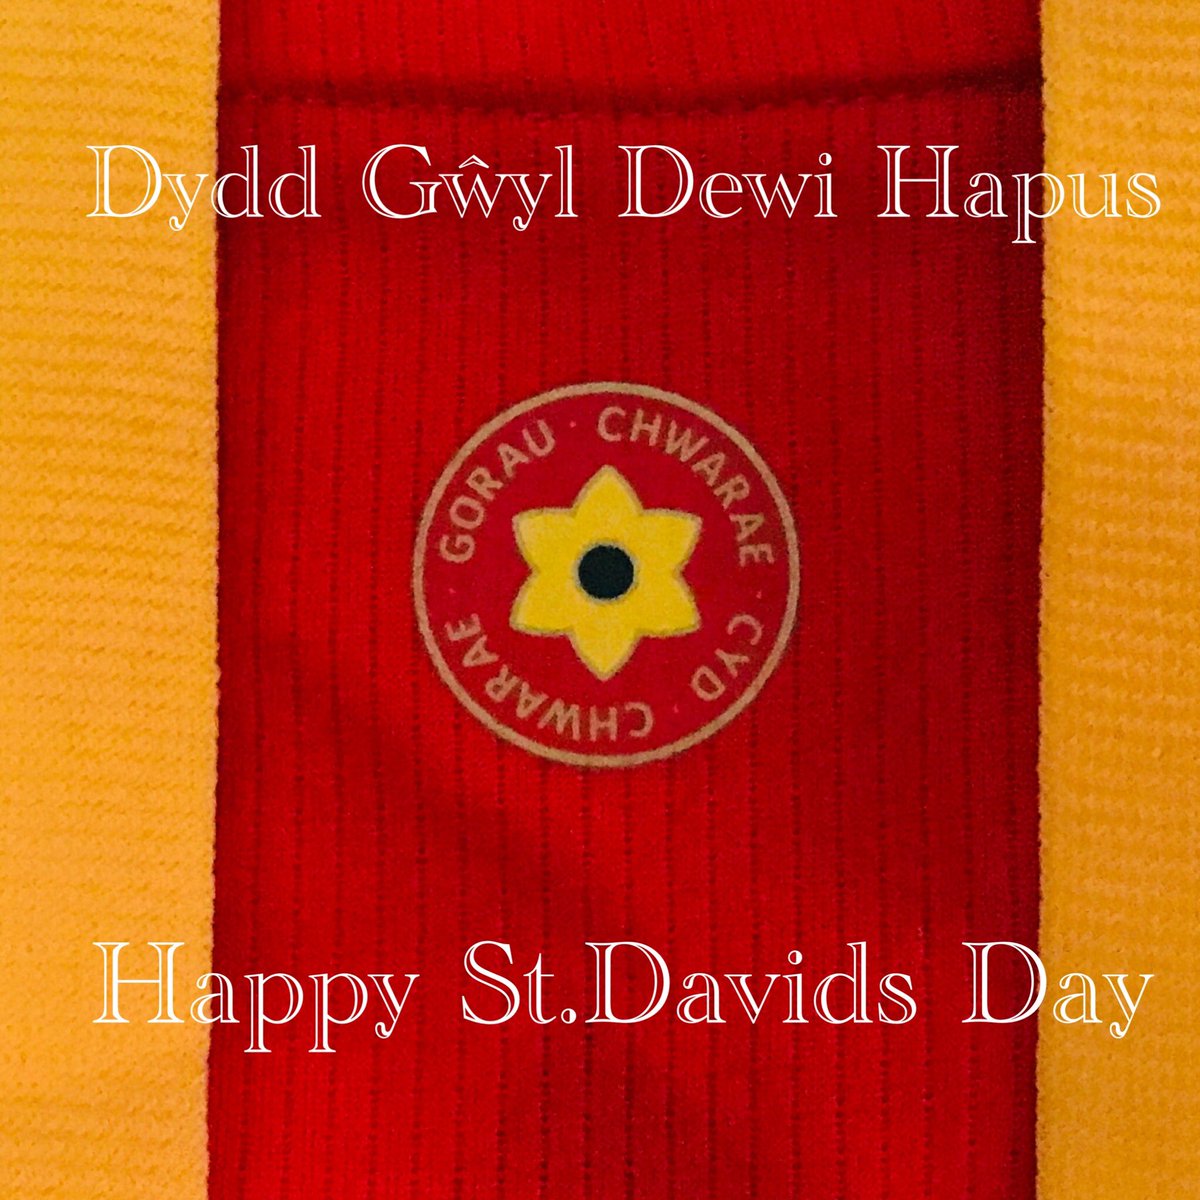 Better late that never, I knew that daffodil 🌼 in the new shirt would come in handy. Happy St.Davids Day #DyddGŵylDewi #StDavidsDay